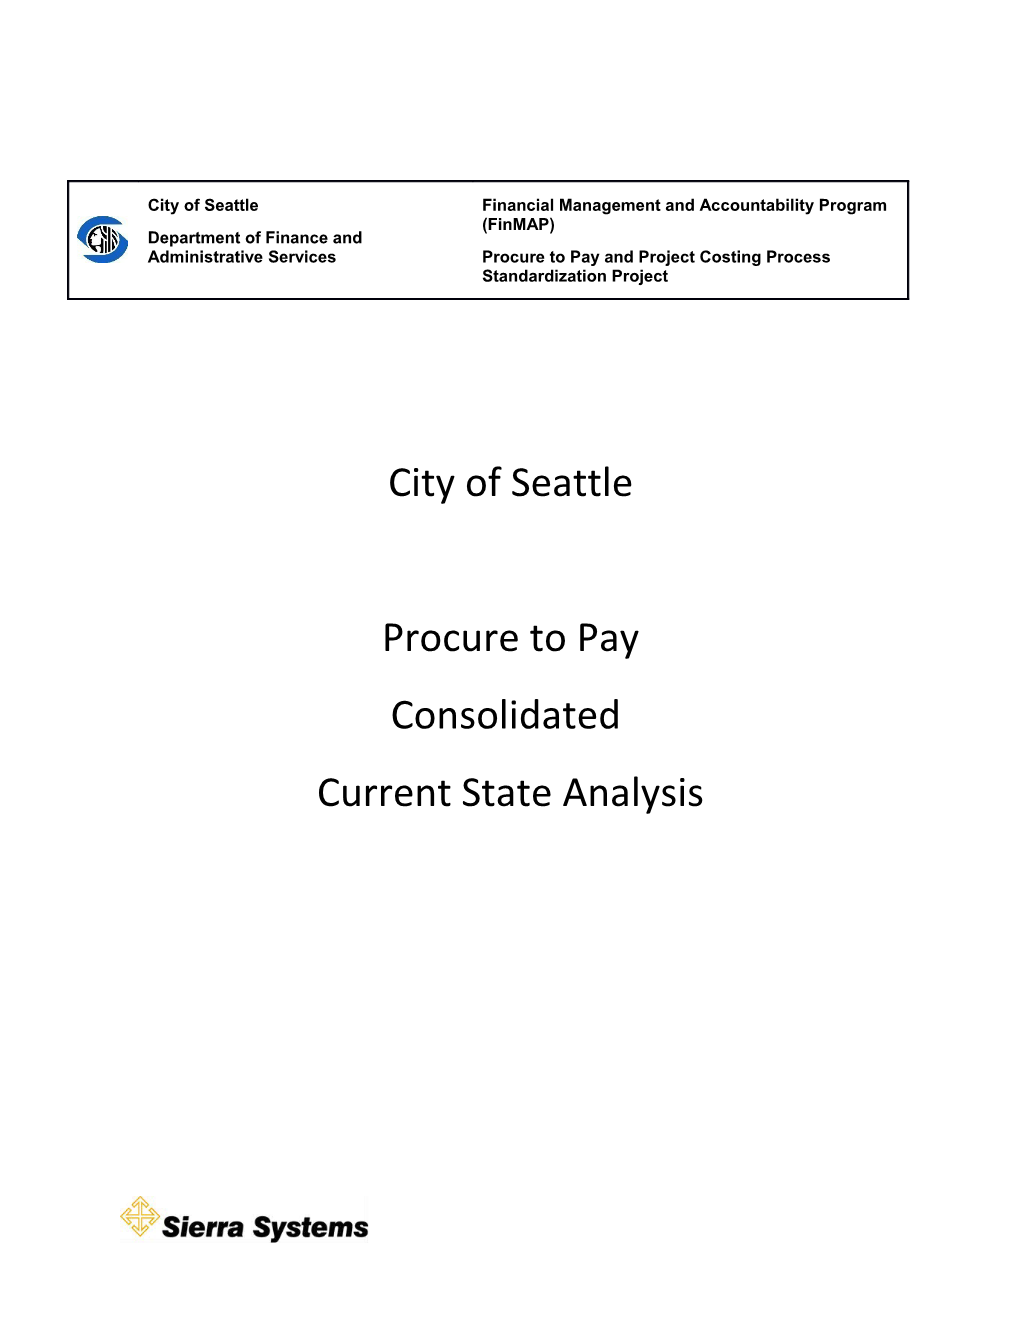 Current State Analysis Report for City of Seattle - DRAFT0.6